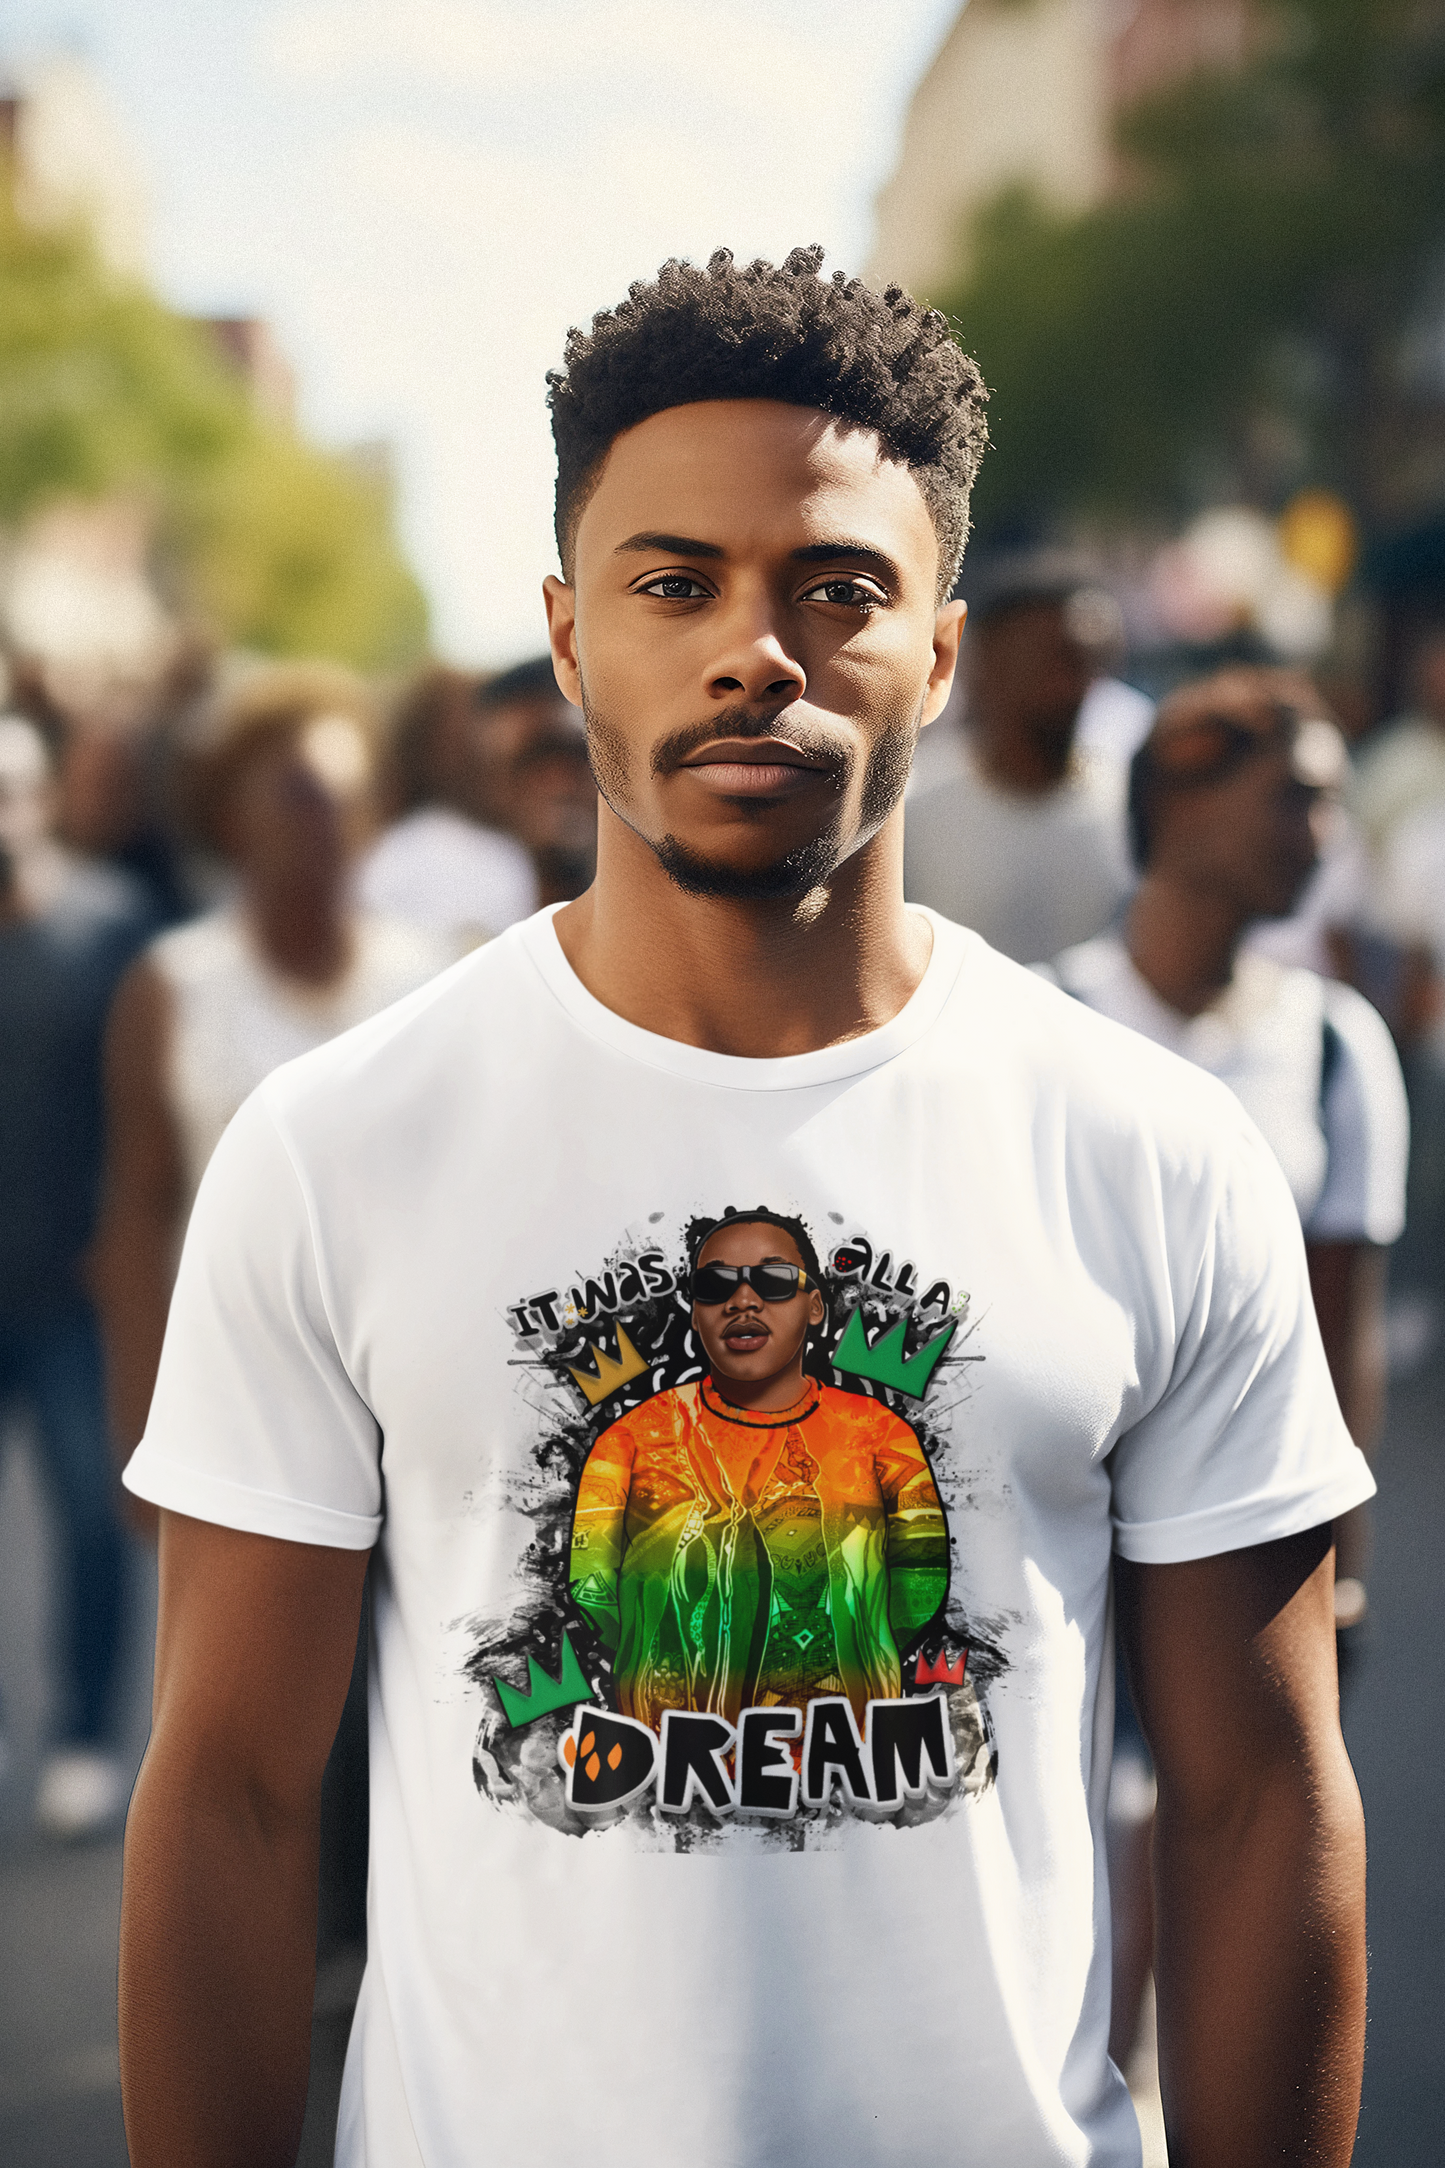 IT WAS ALL A DREAM T-shirt